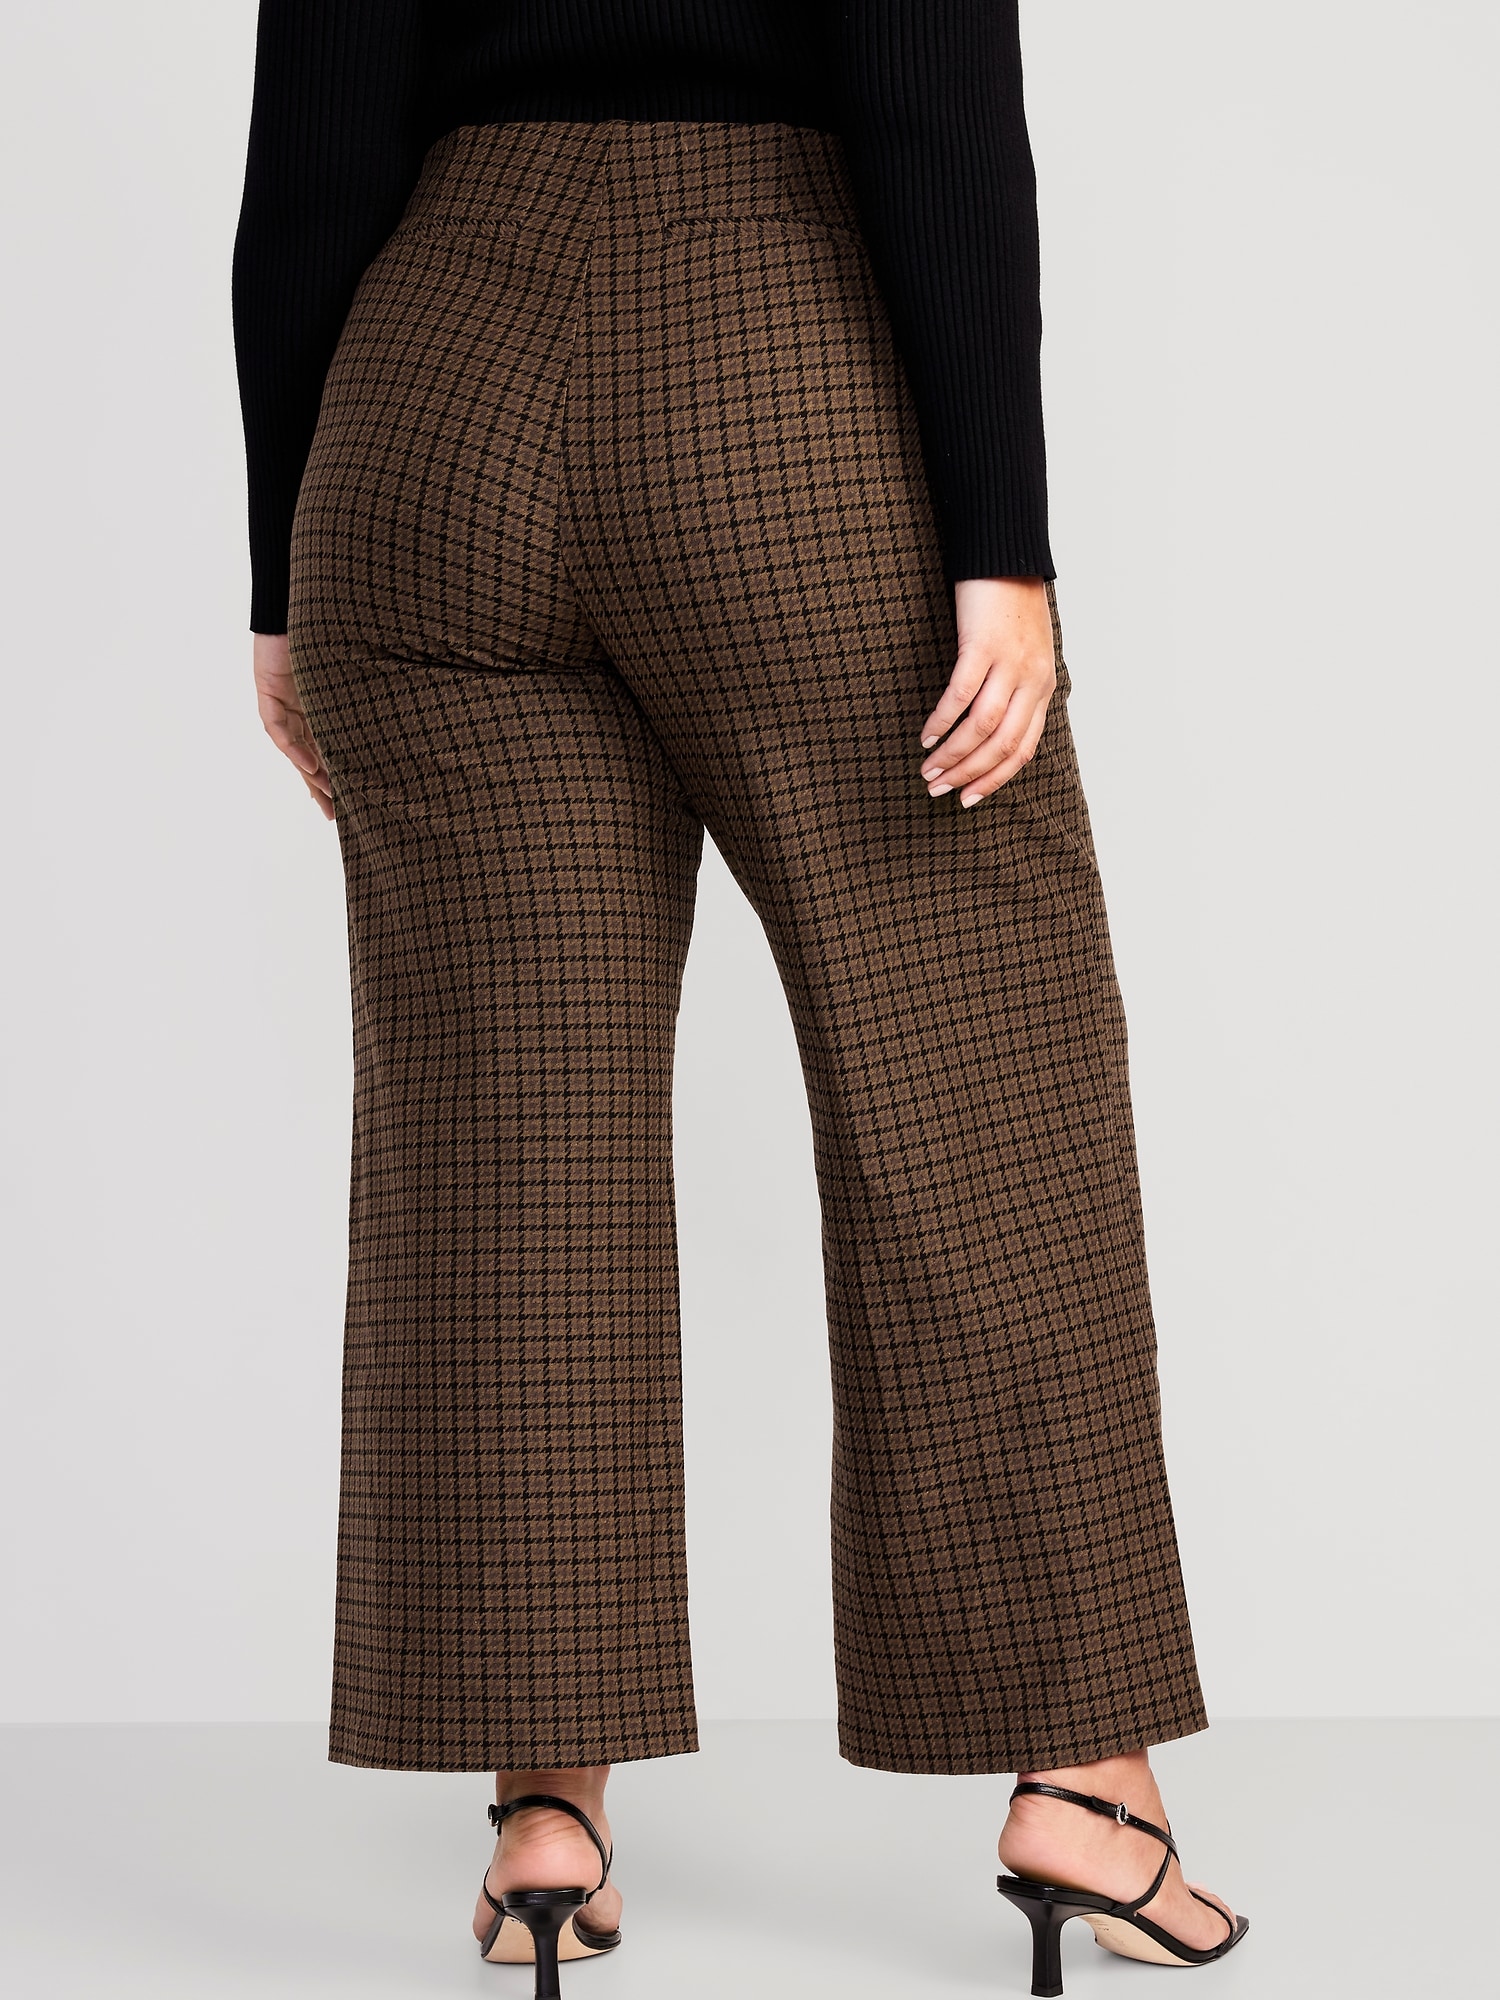 High-Waisted Pull-On Pixie Wide-Leg Pants | Old Navy